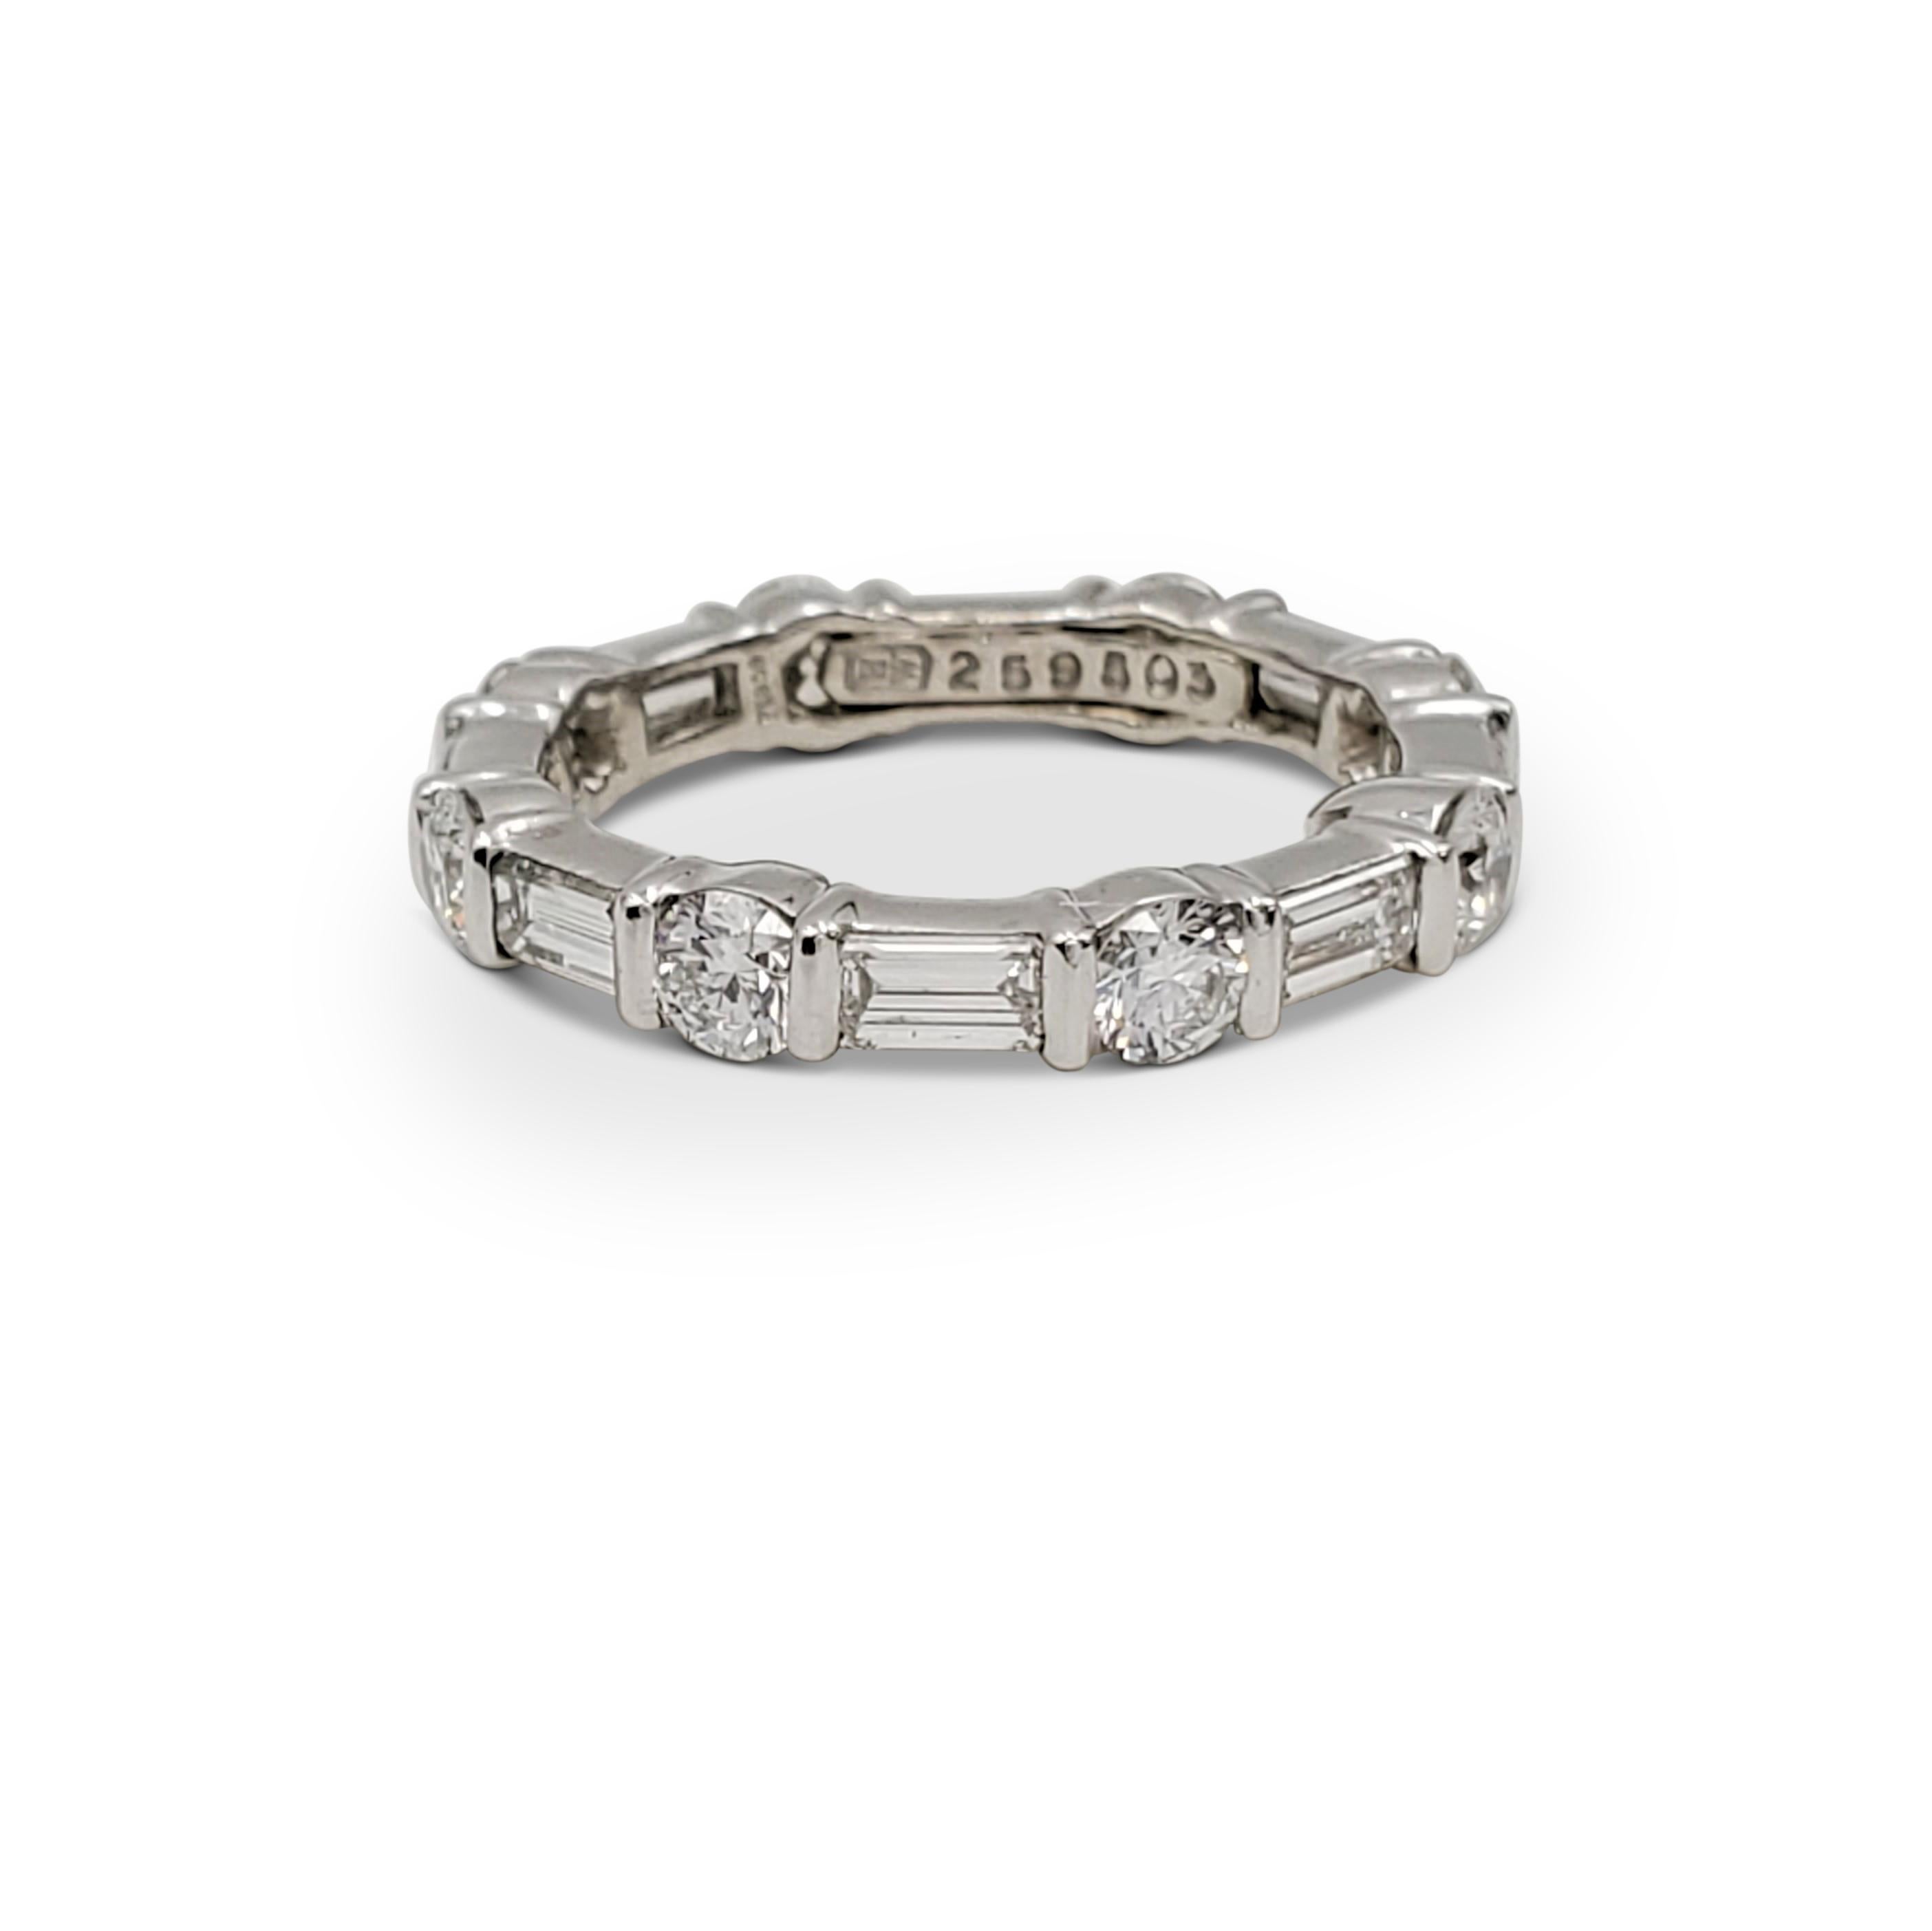 Authentic Harry Winston eternity band crafted in platinum and bar-set with alternating round brilliant and emerald-cut diamonds (E-F, VS) weighing an estimated 1.65 carats total weight. Signed HW, PT950, with serial number. Ring size 3 1/4. The ring